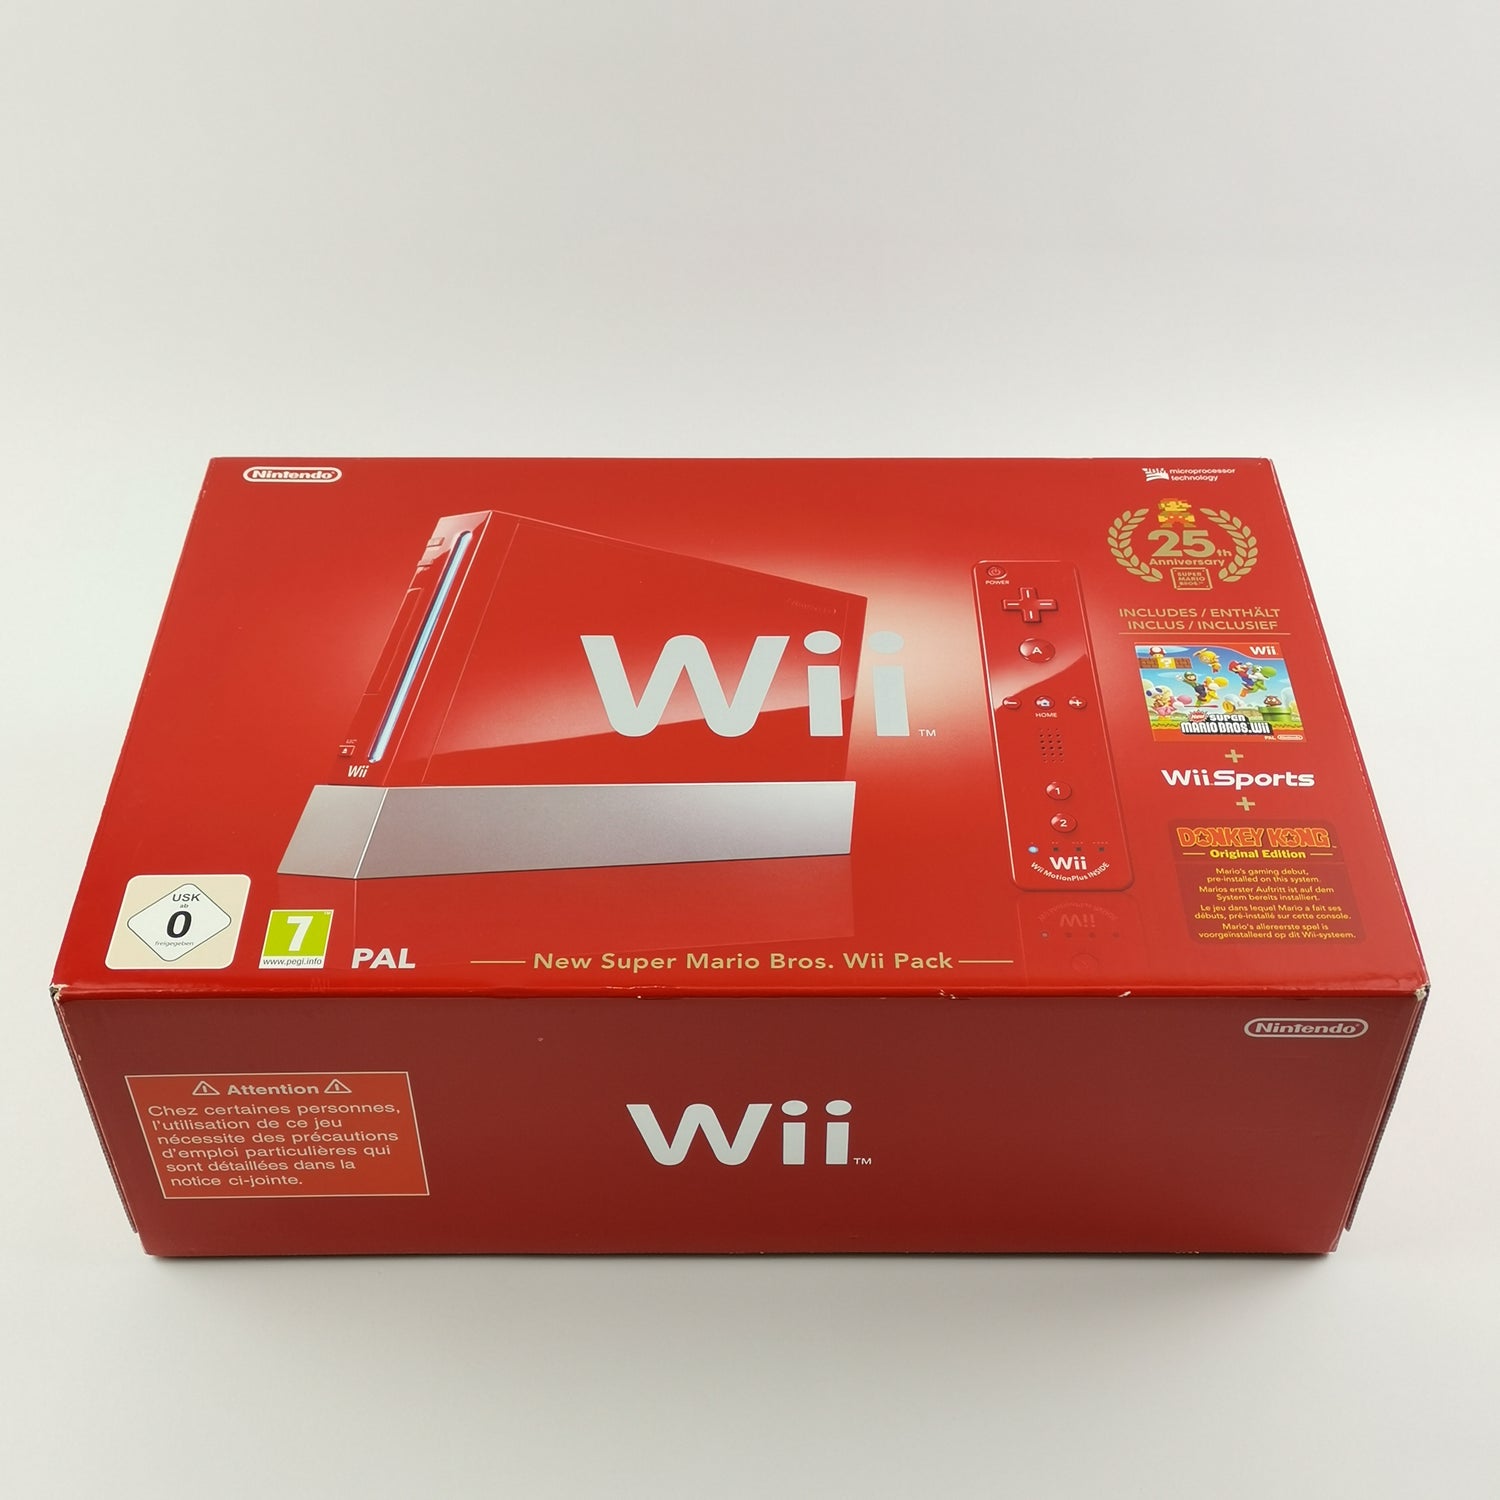 Nintendo Wii Konsole Rot : New Super Mario Bros. Wii Pack 25th Anniversary - OVP